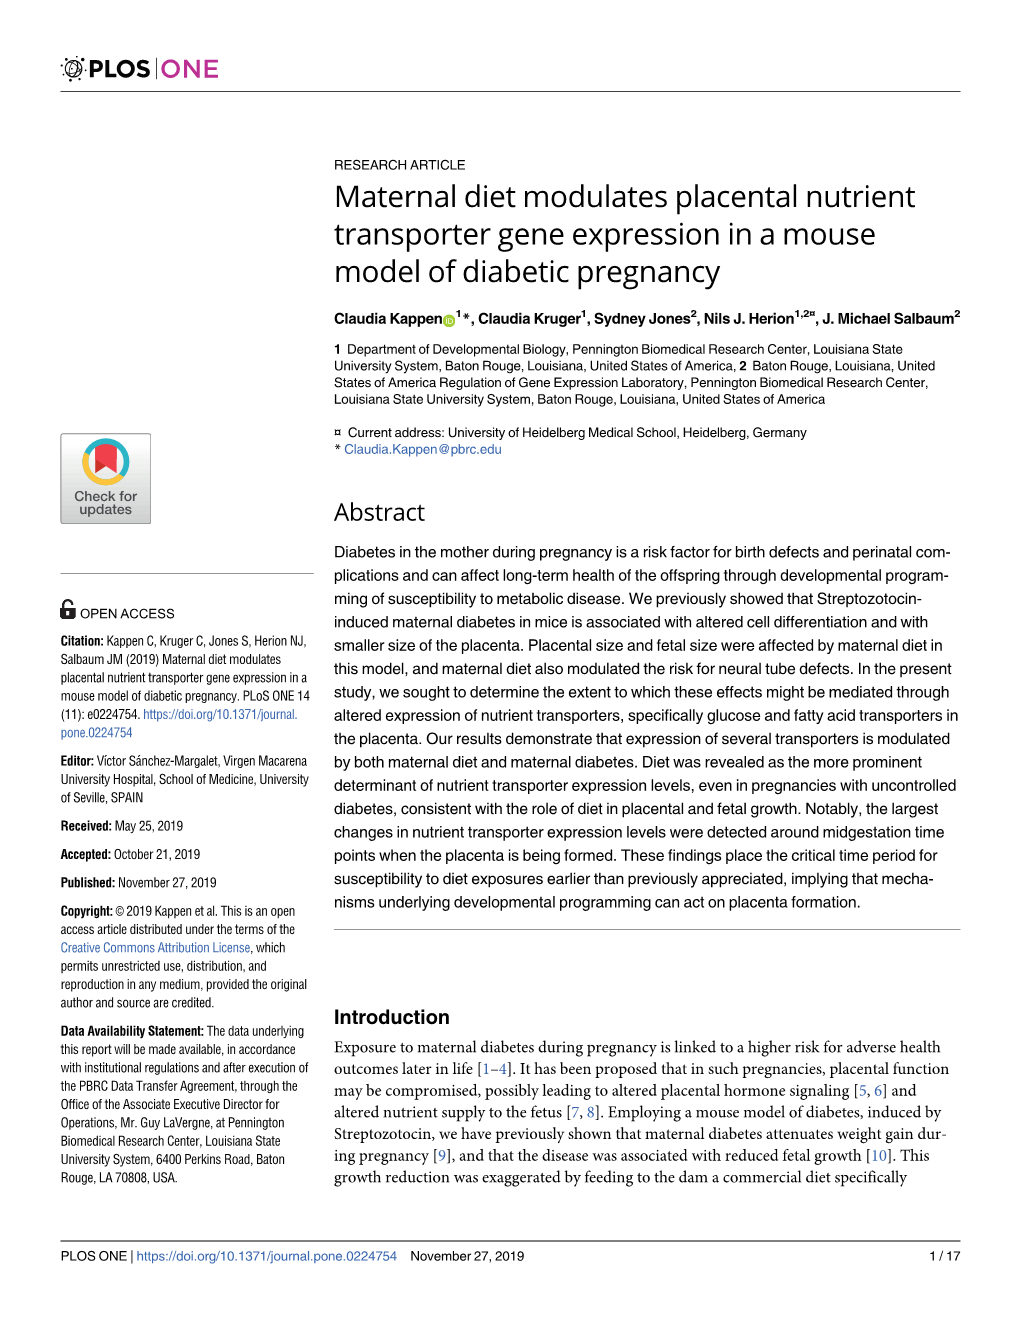 Maternal Diet Modulates Placental Nutrient Transporter Gene Expression in a Mouse Model of Diabetic Pregnancy